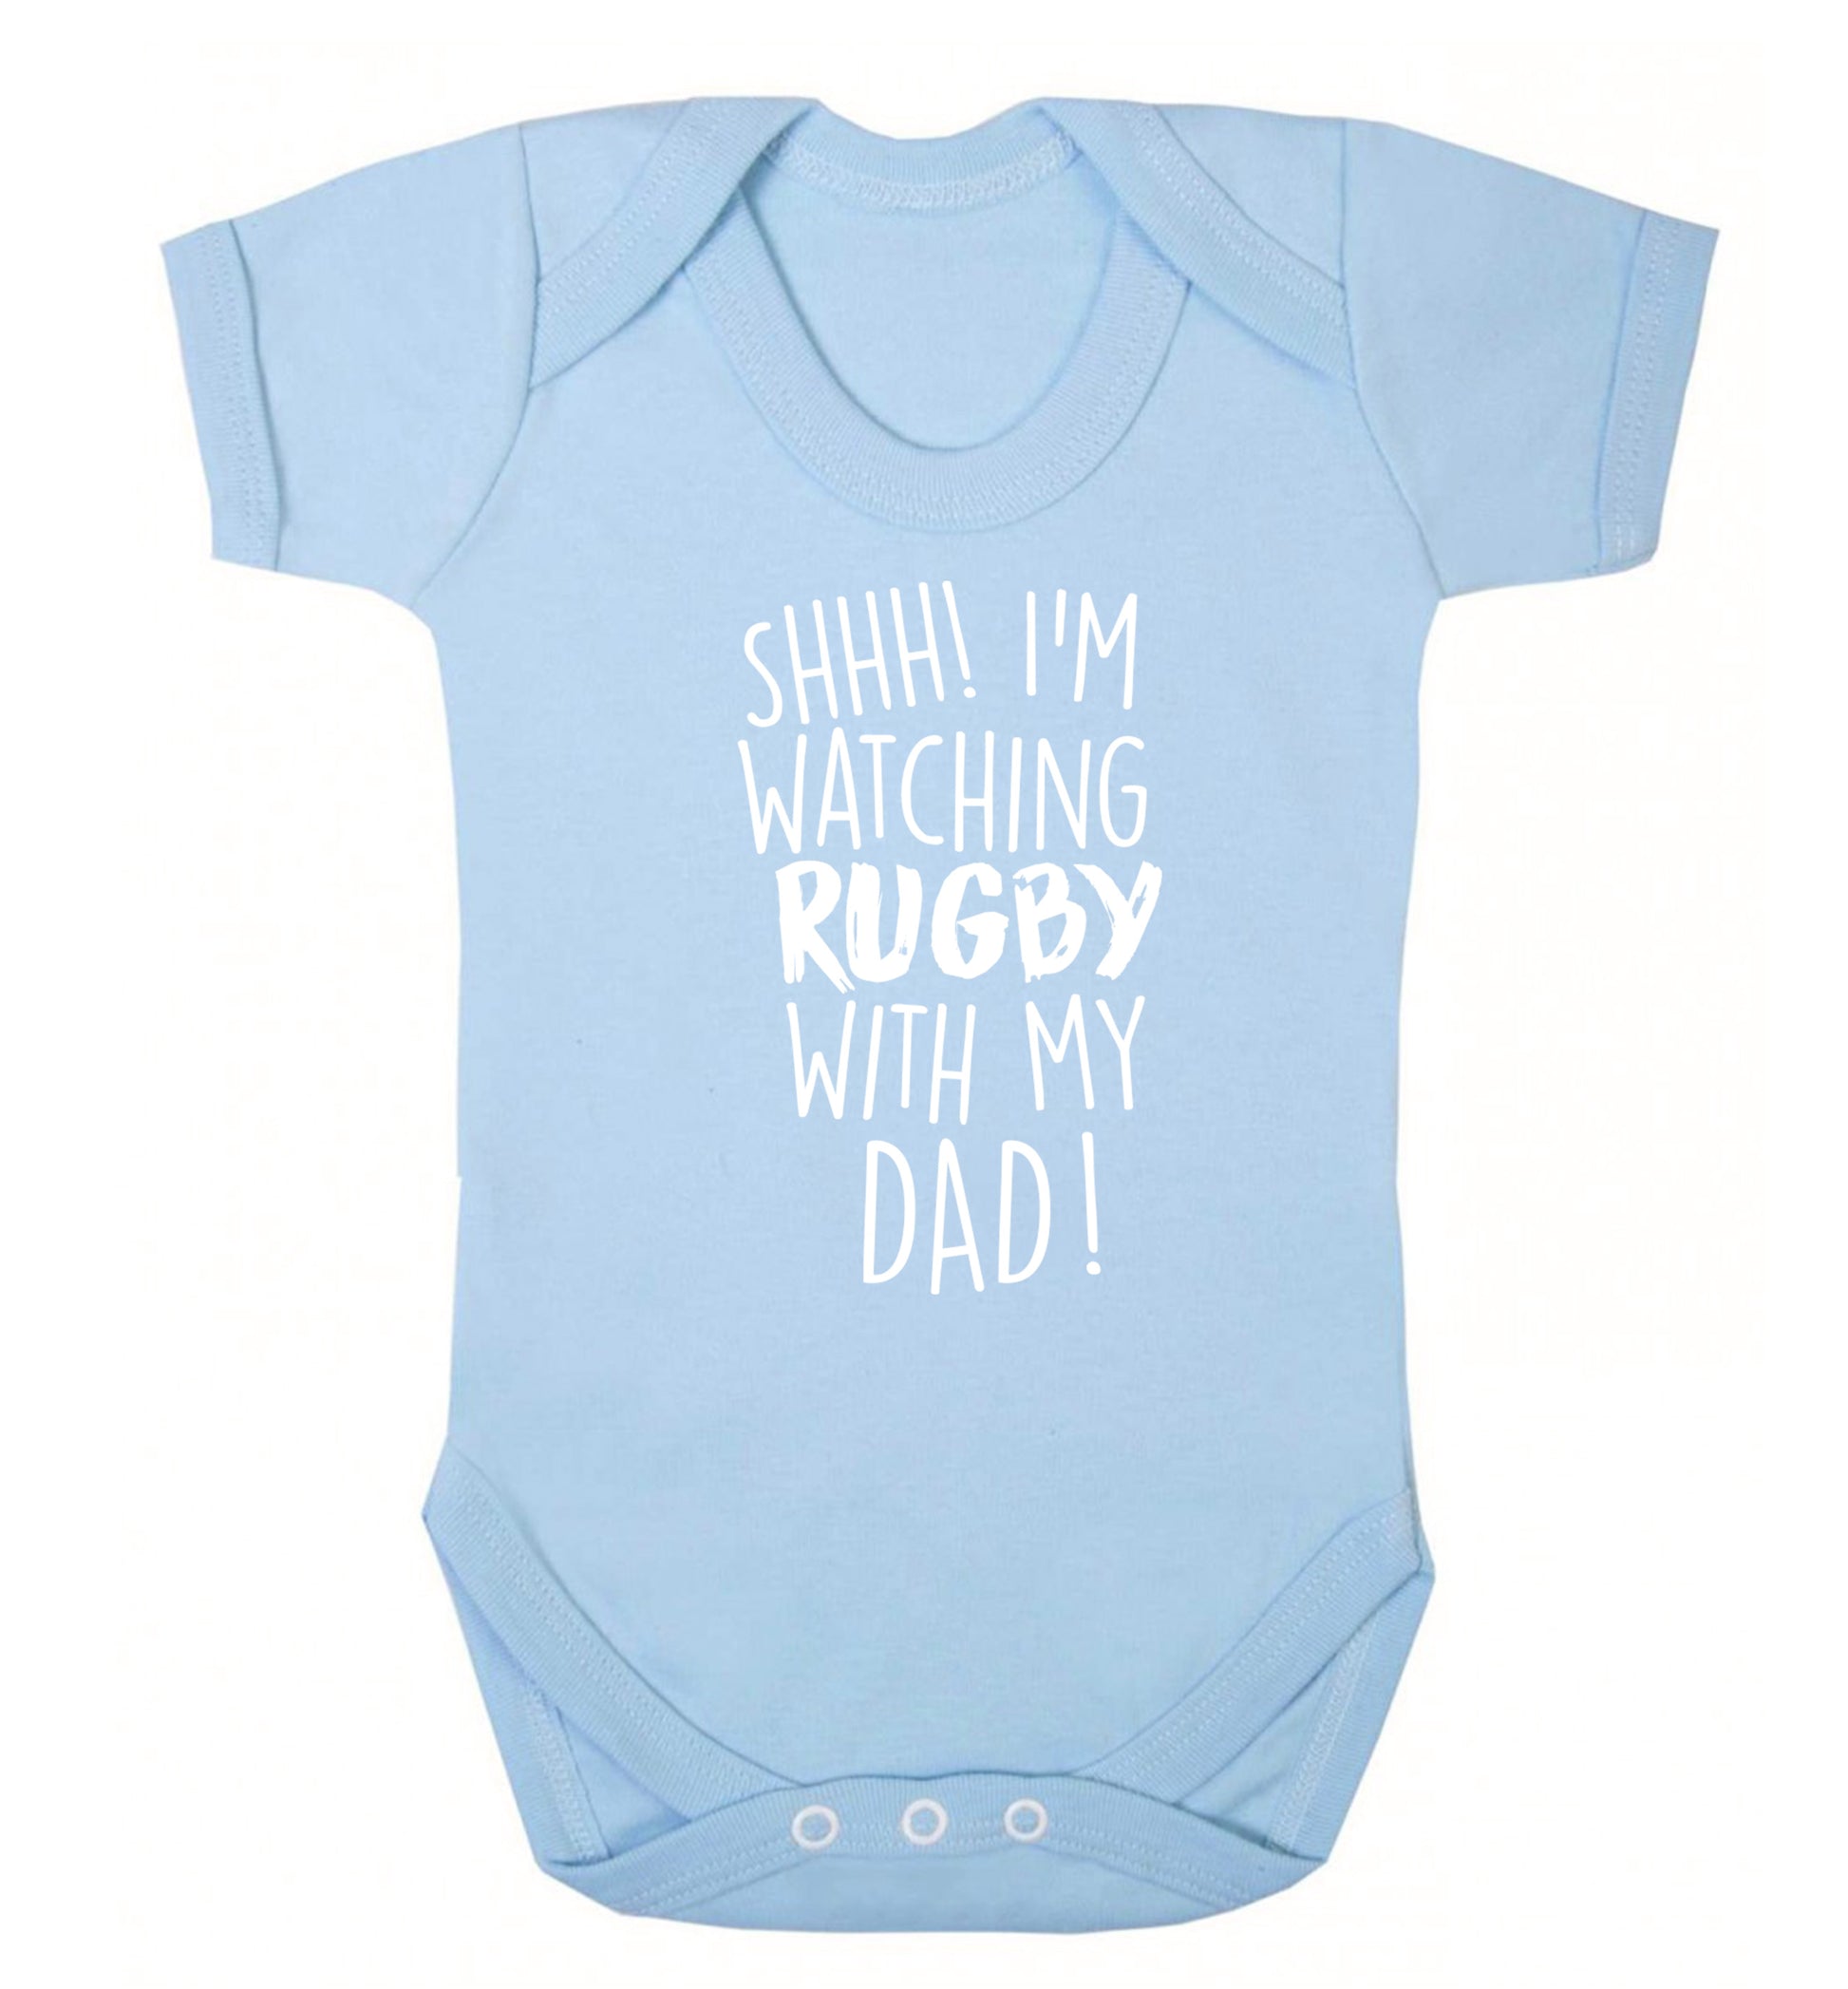 Shh... I'm watching rugby with my dad Baby Vest pale blue 18-24 months